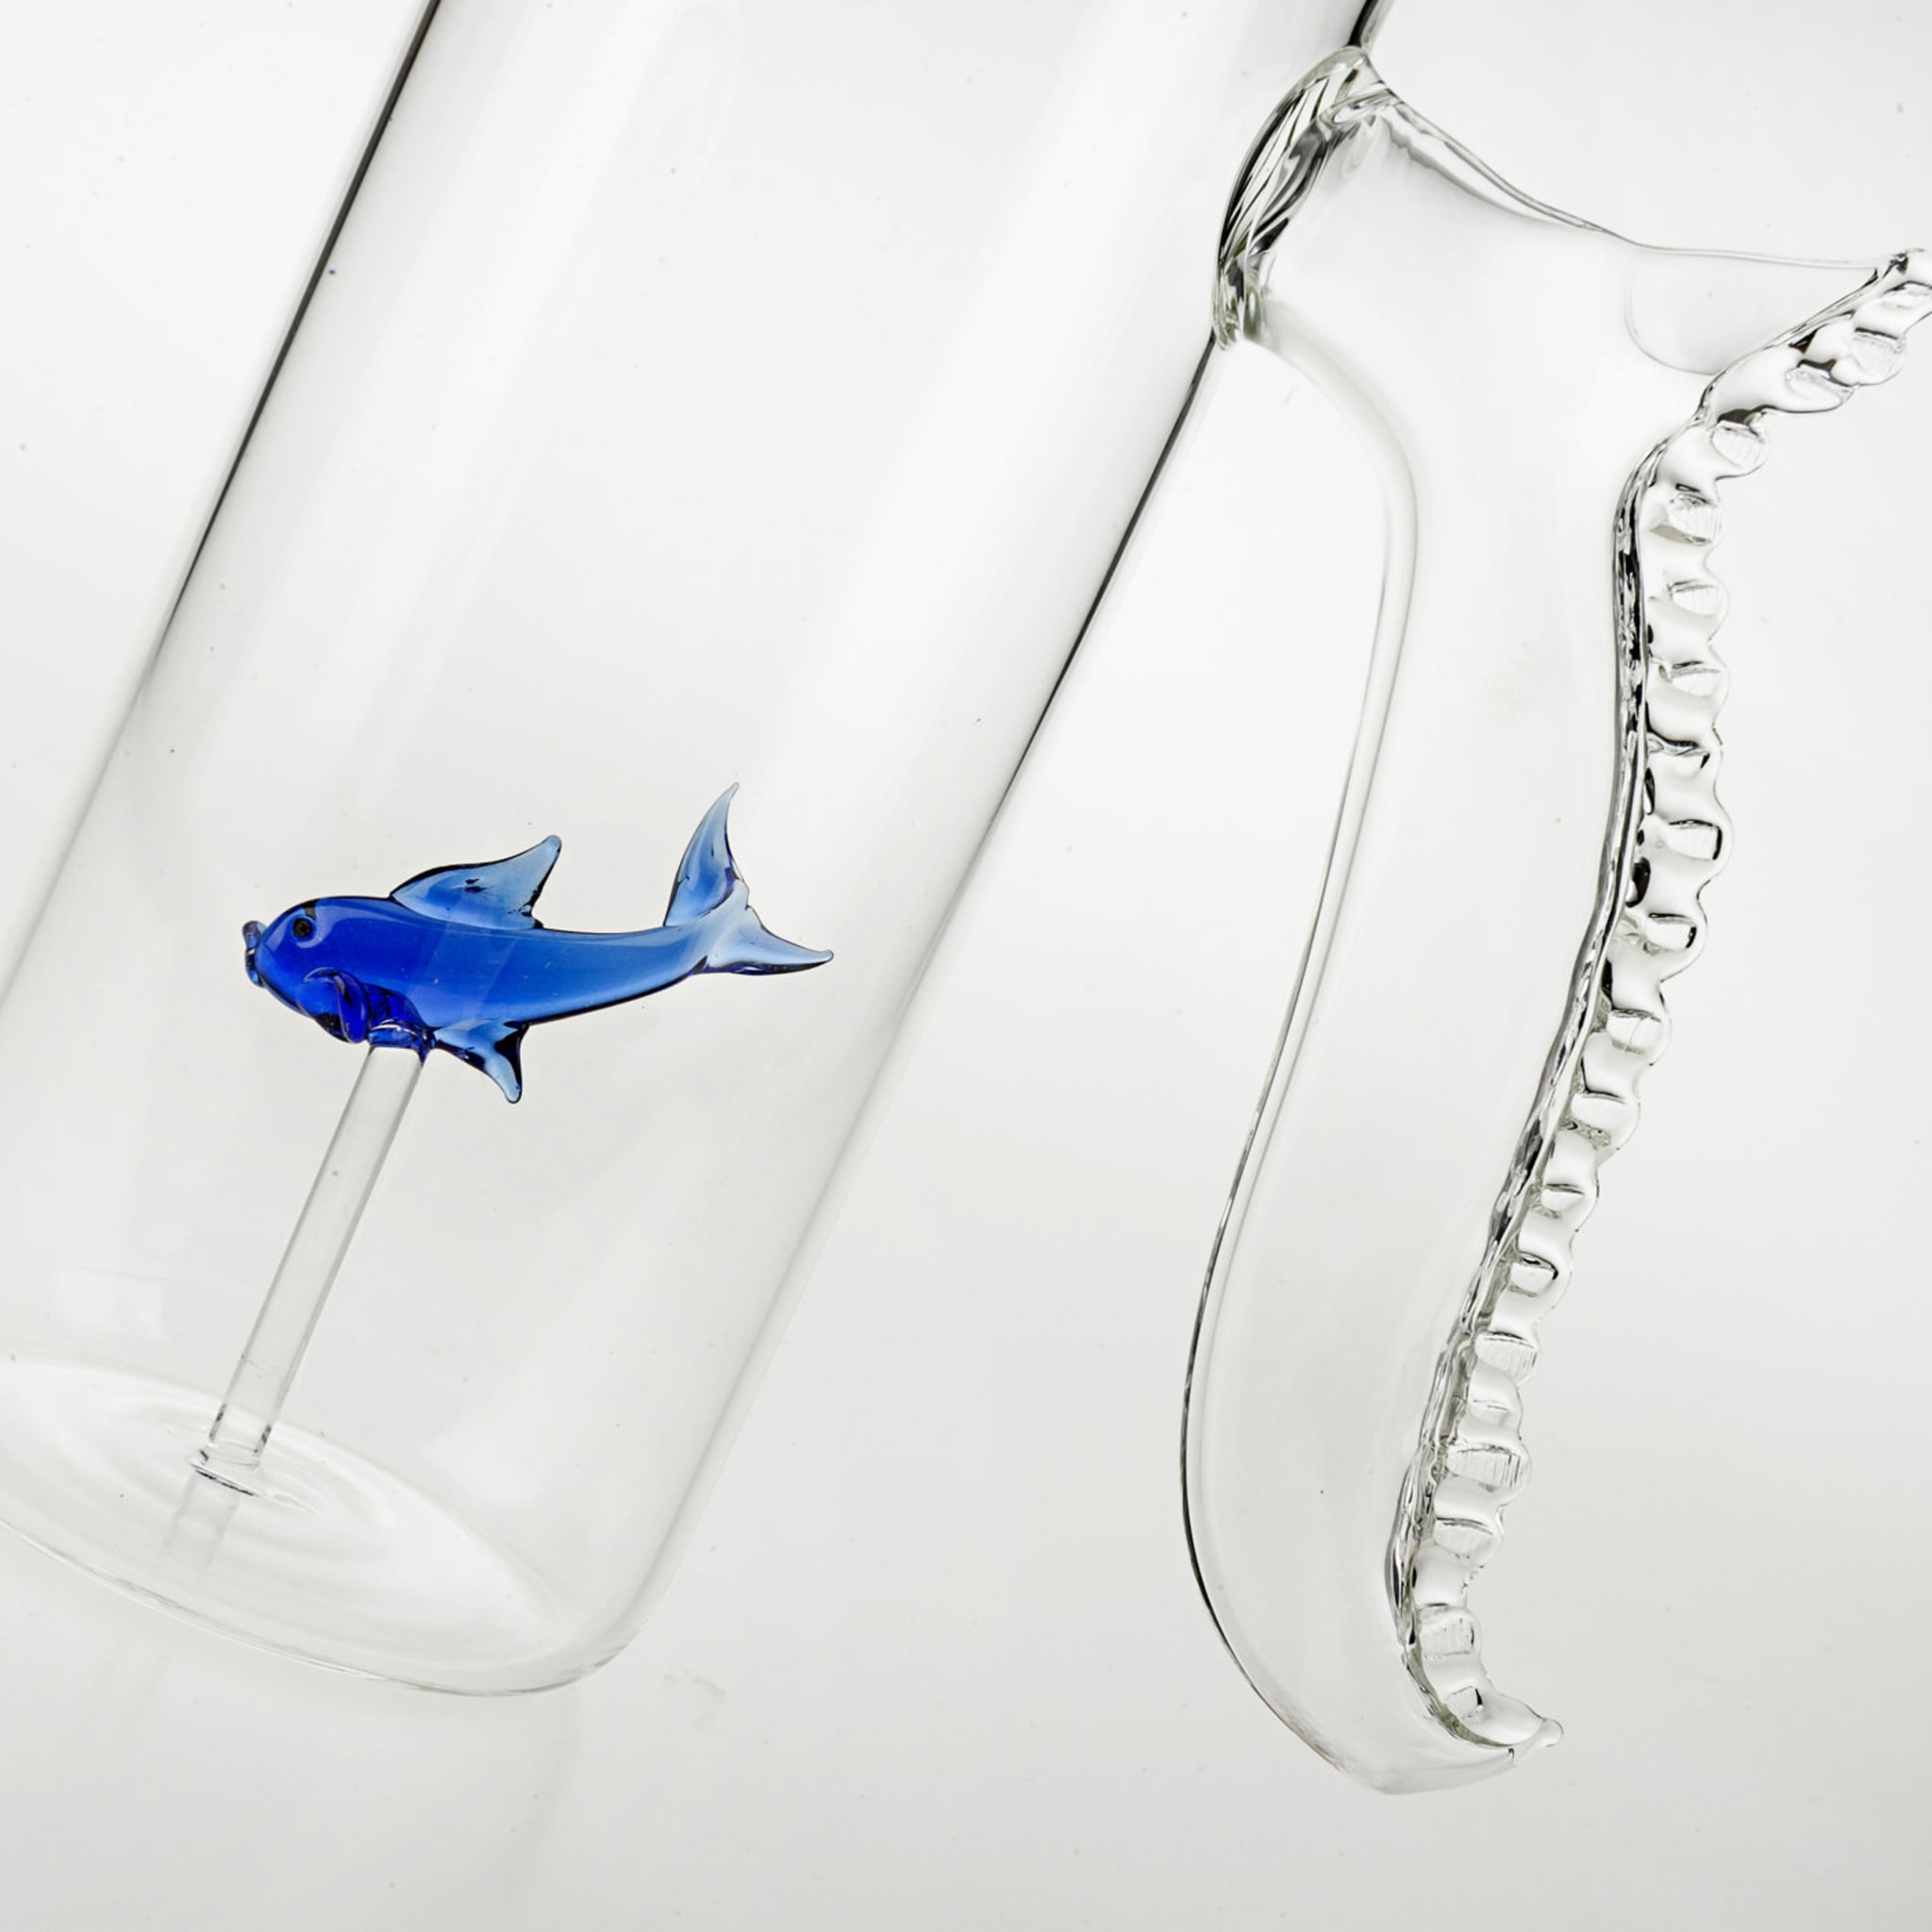 Set of Little Blue Fish Pitcher and Four Rounded Little Blue Fish Glasses - Alternative view 2